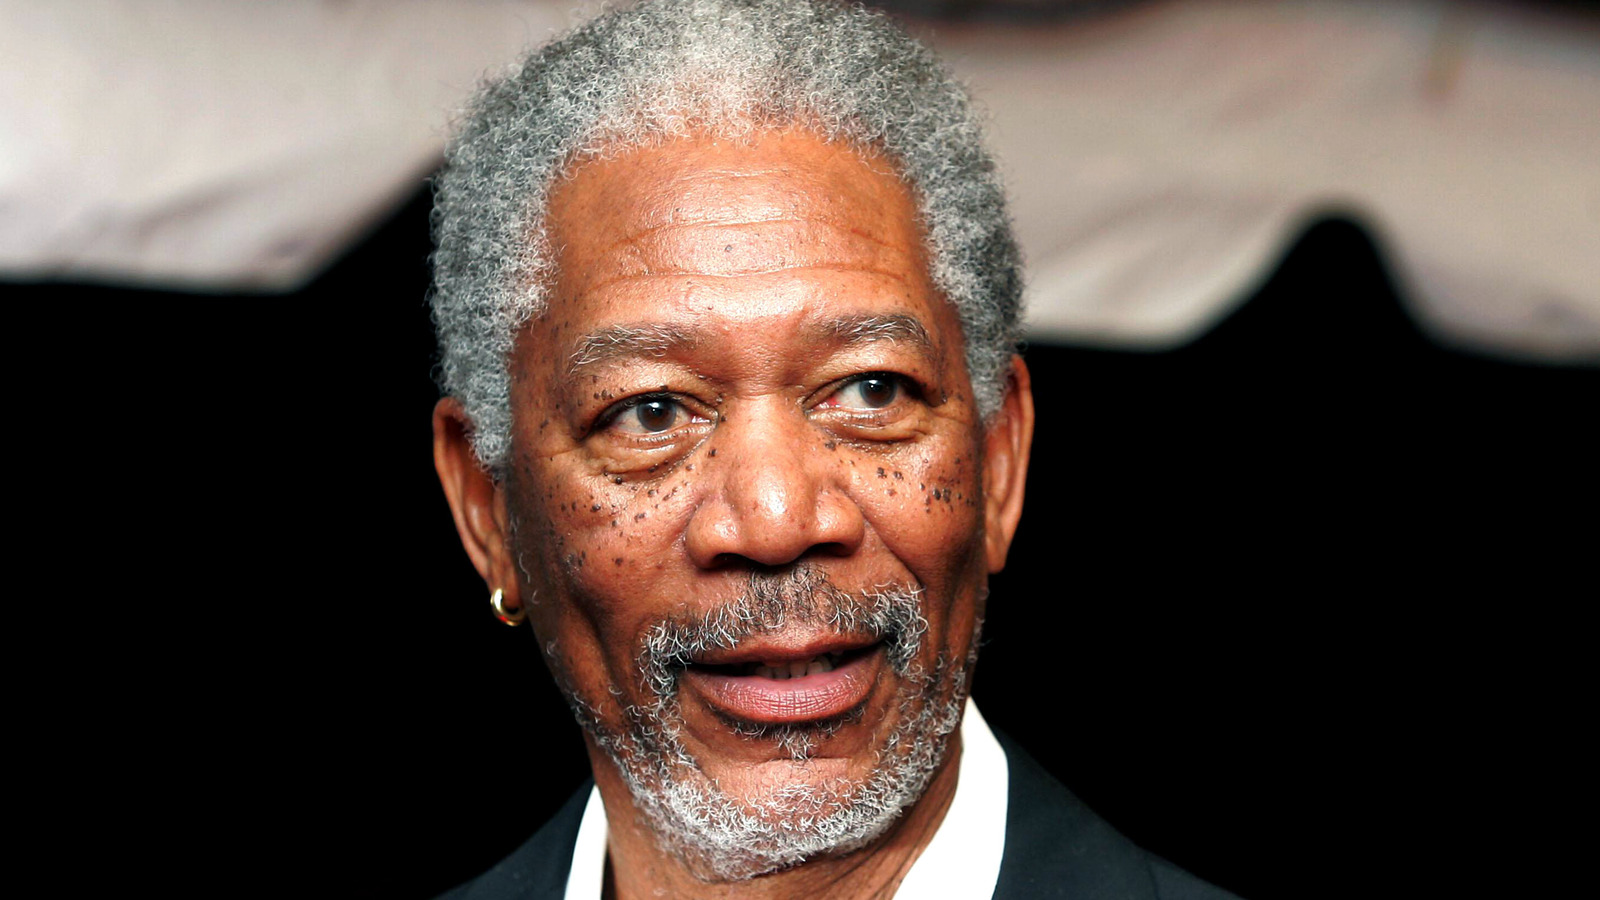 Tilbud Watt Forræderi How To Give Yourself Morgan Freeman's Voice In Video Chat